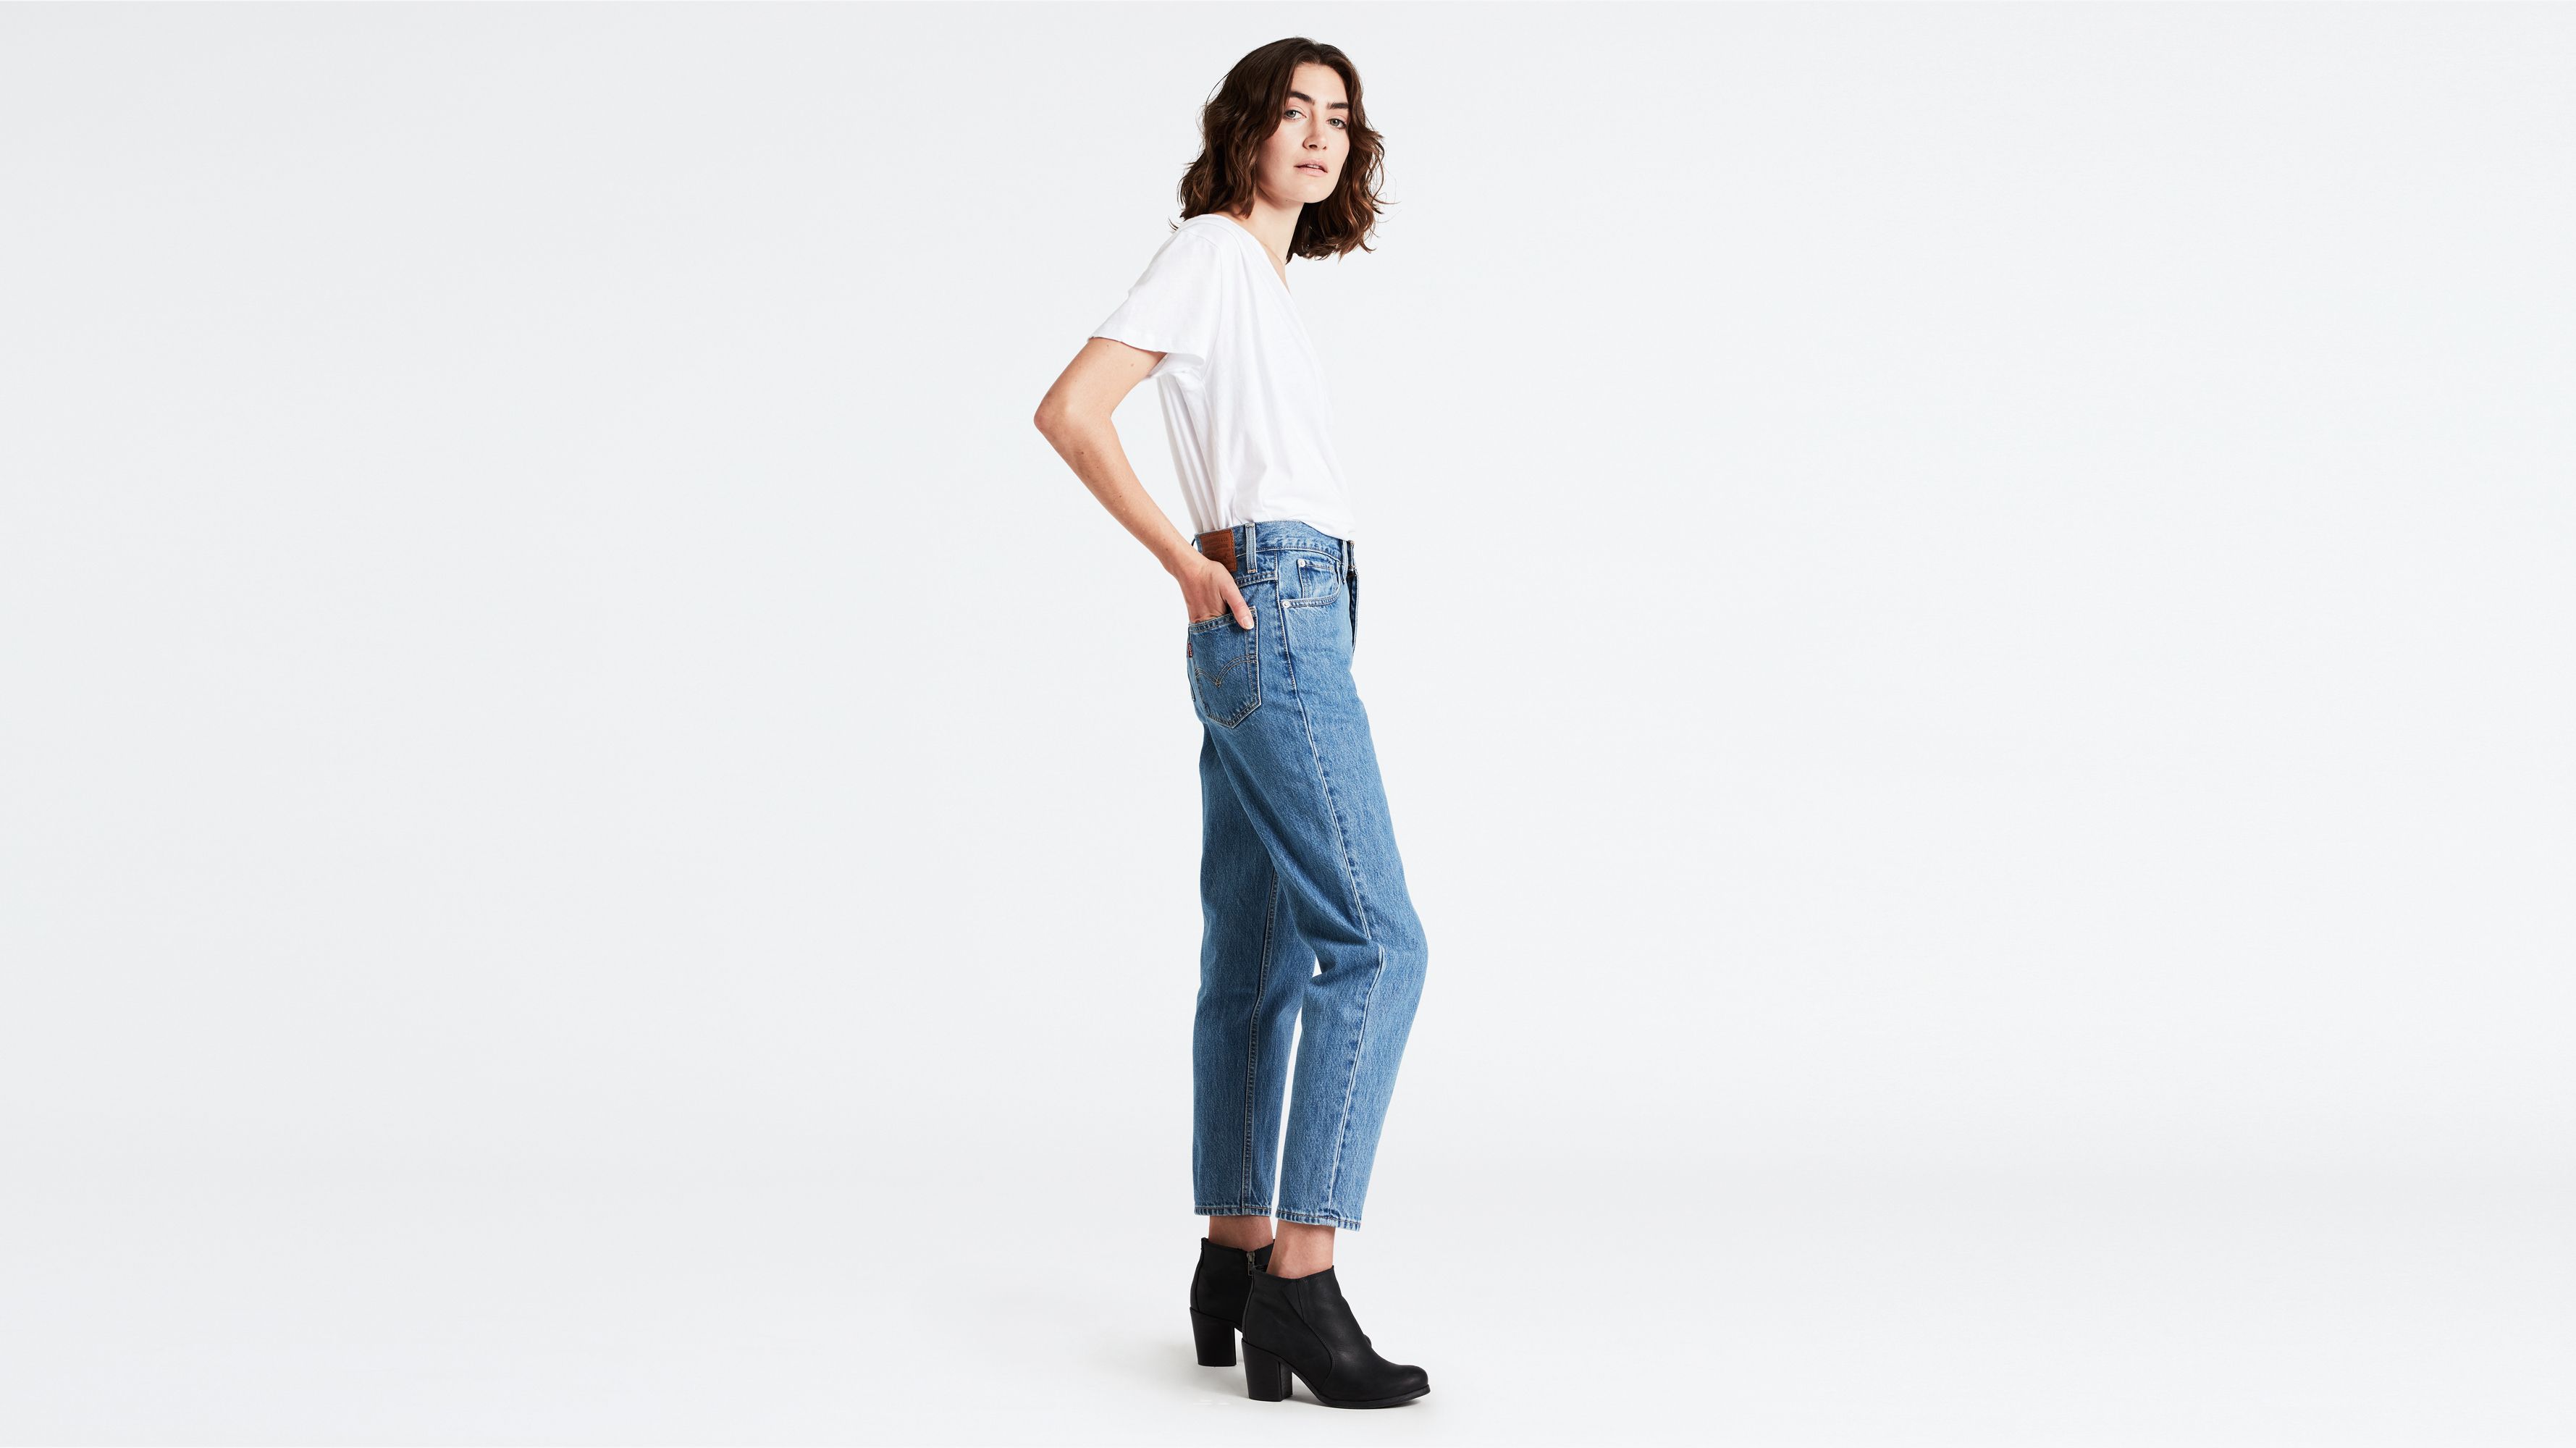 levi's 501 skinny small blessings